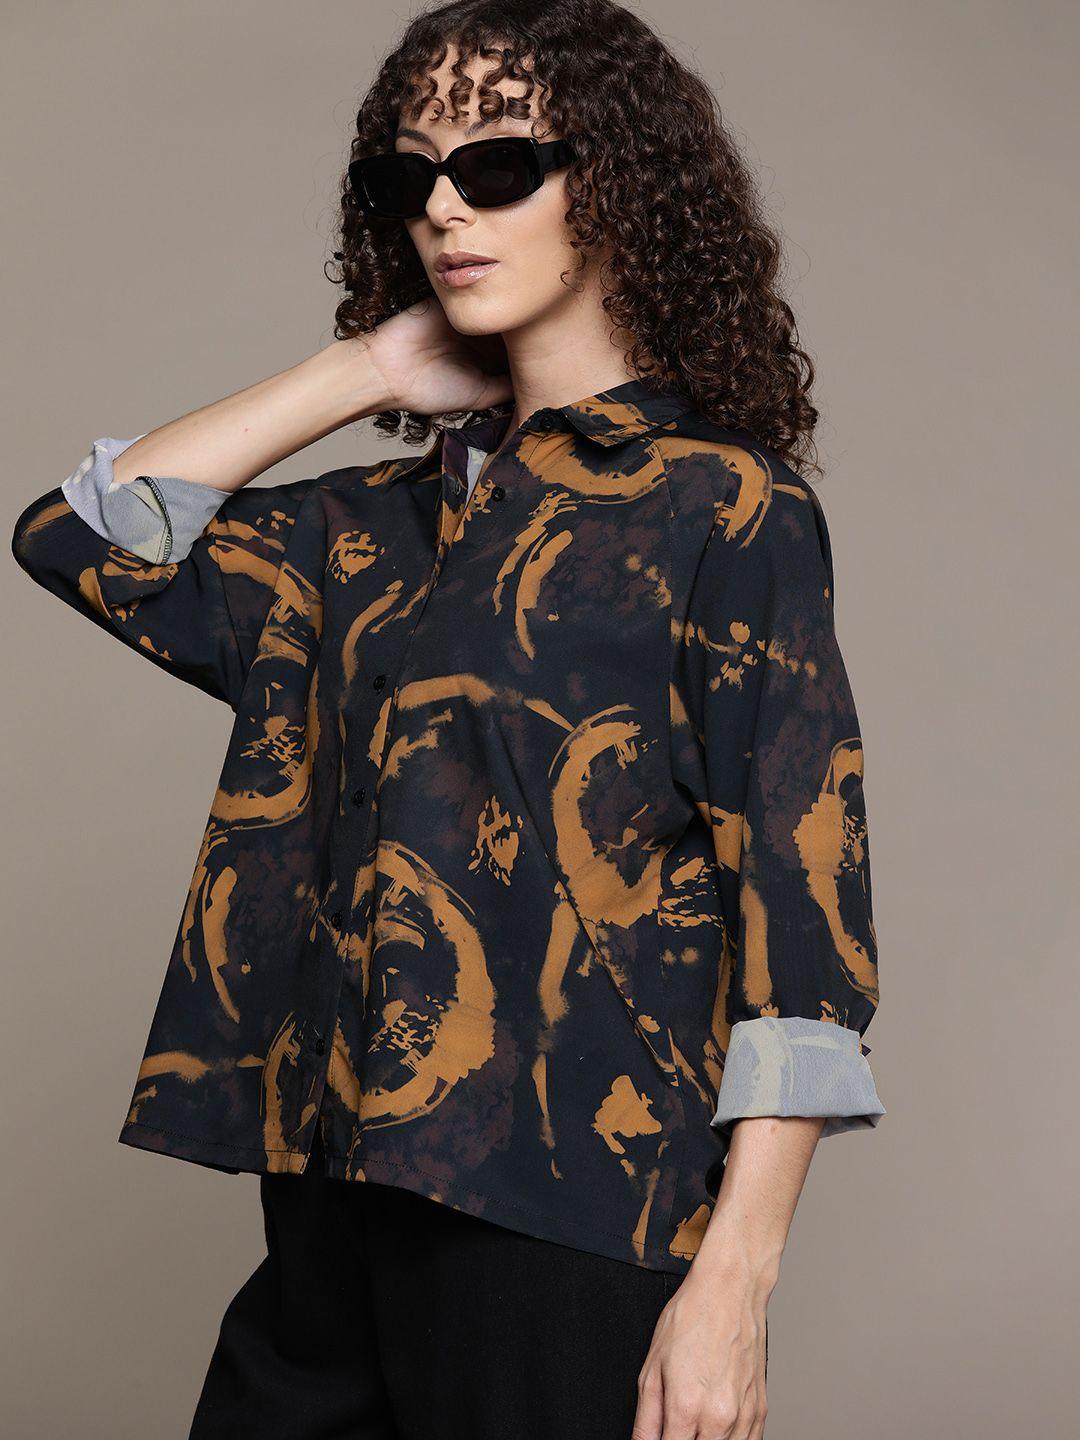 the-roadster-lifestyle-co.-printed-oversized-shirt